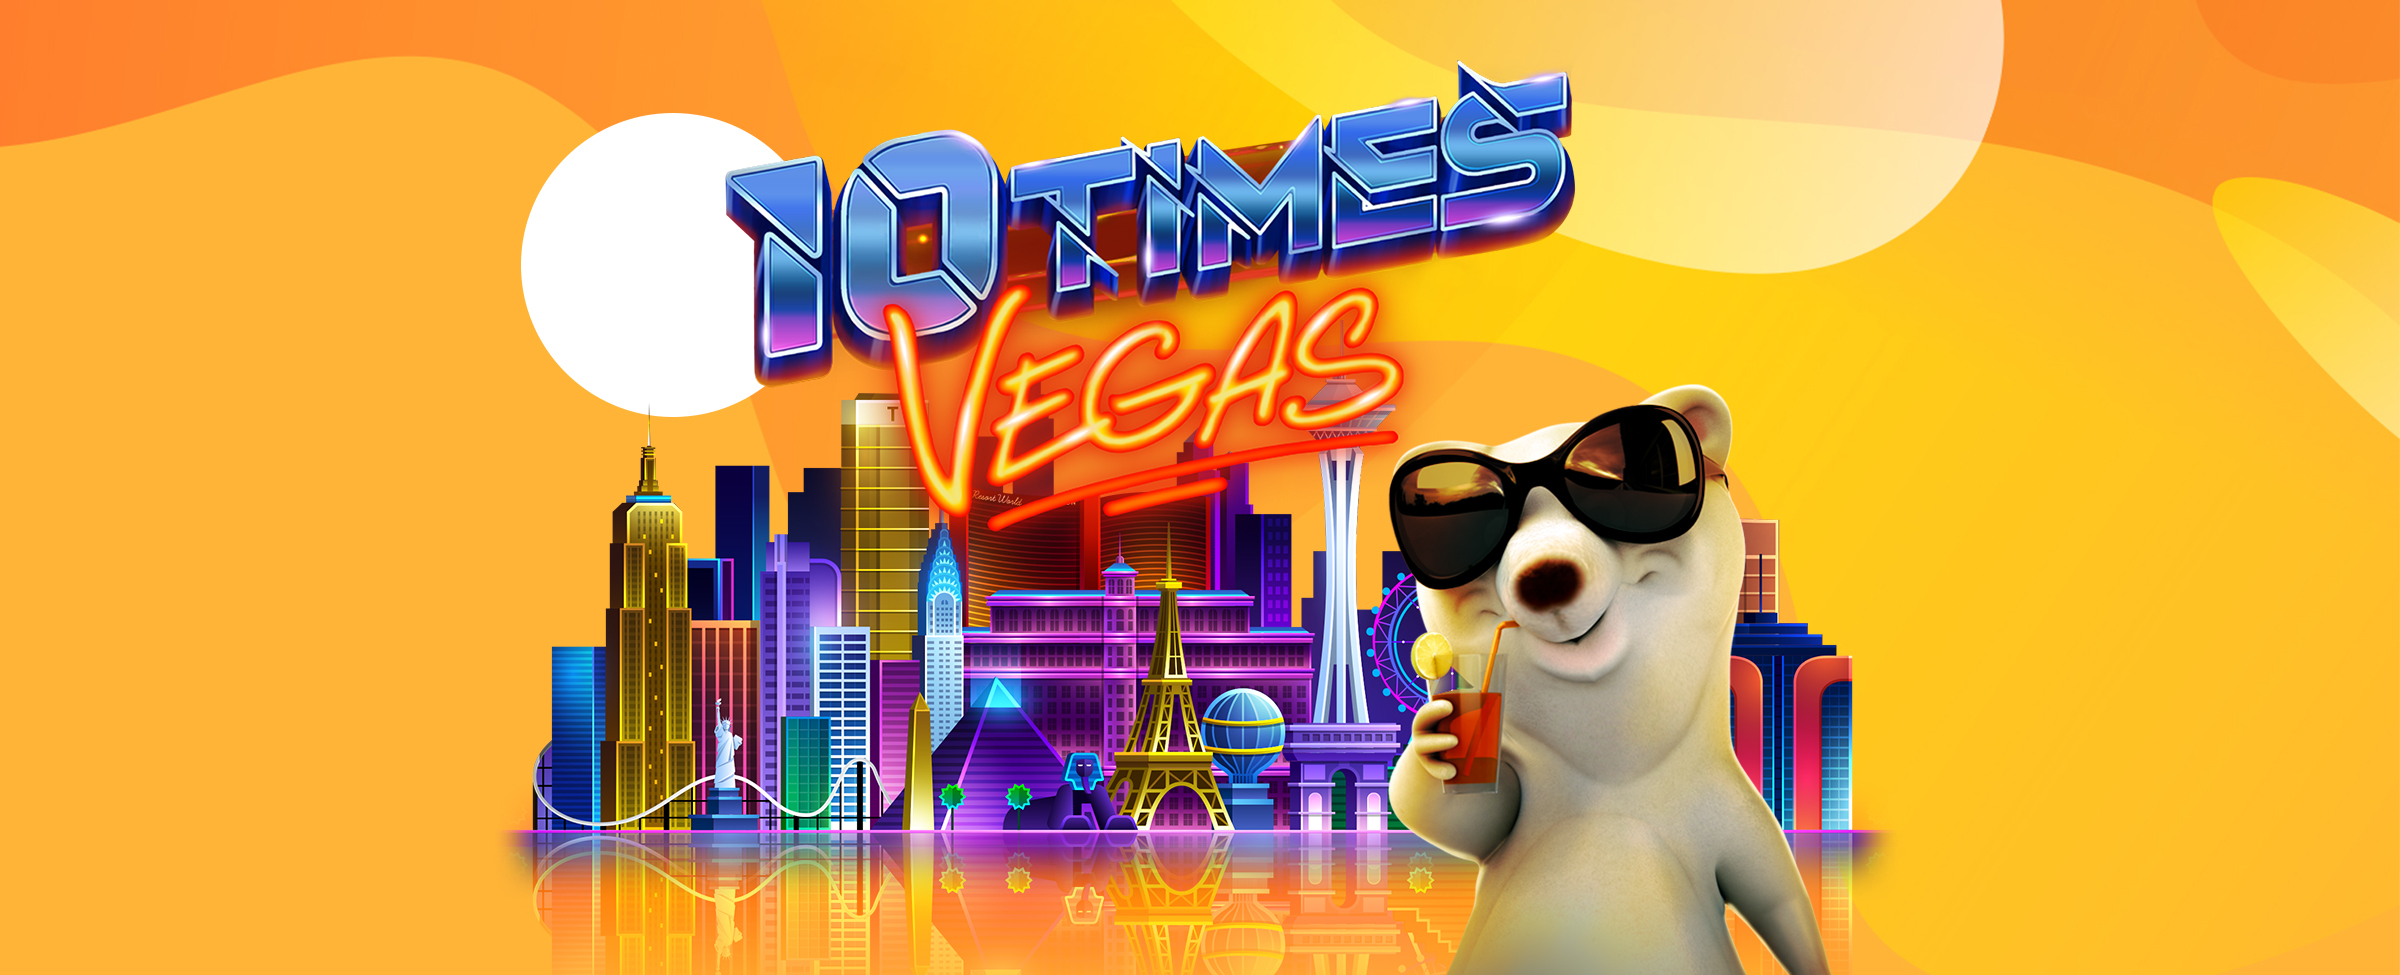 If you've never played 10 Times Vegas at Slots.lv before, you're in for a treat! Strap yourself in and let's get started as we review one of our most popular games